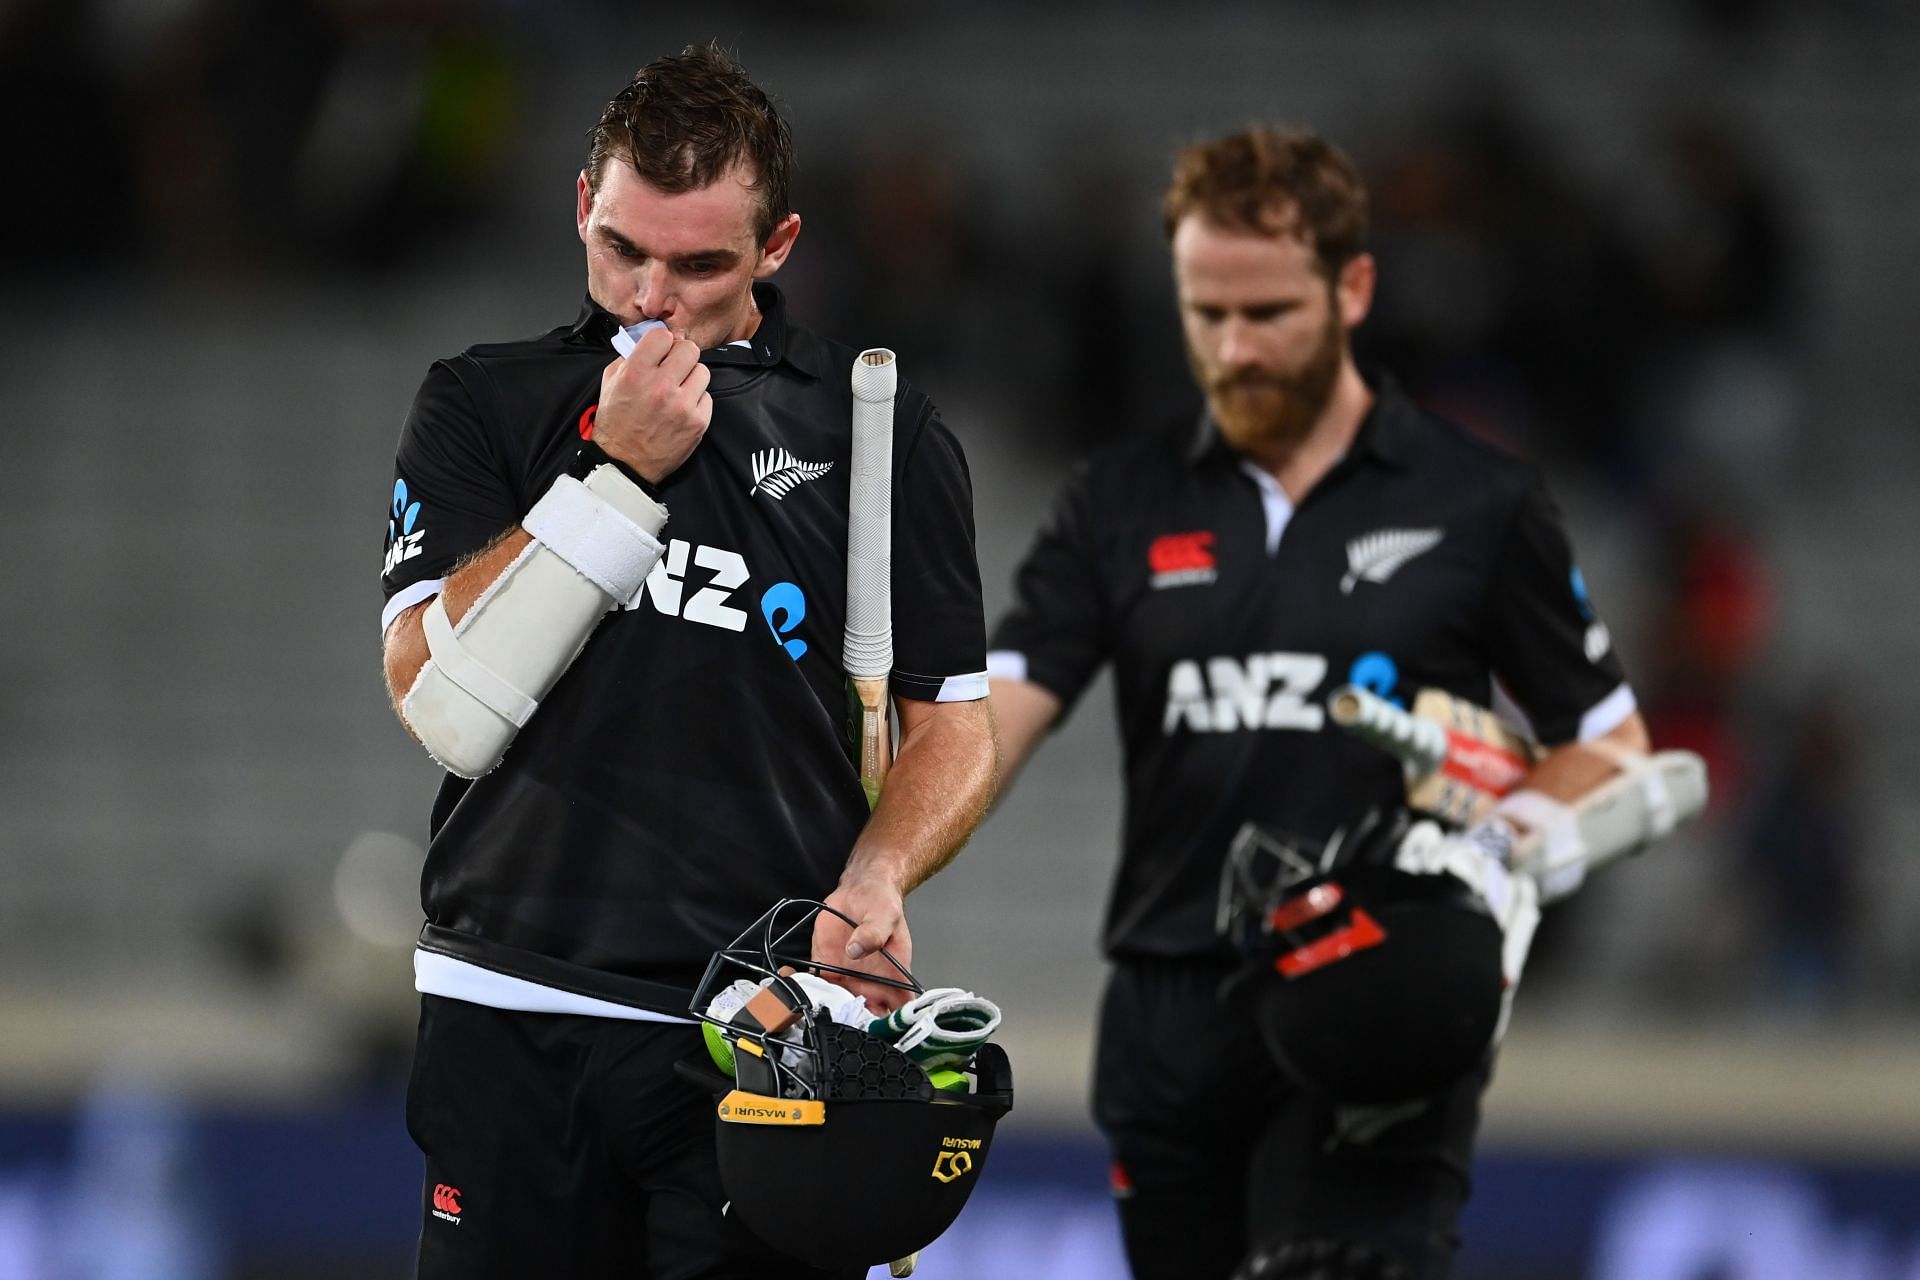 Williamson and Latham won the match for NZ